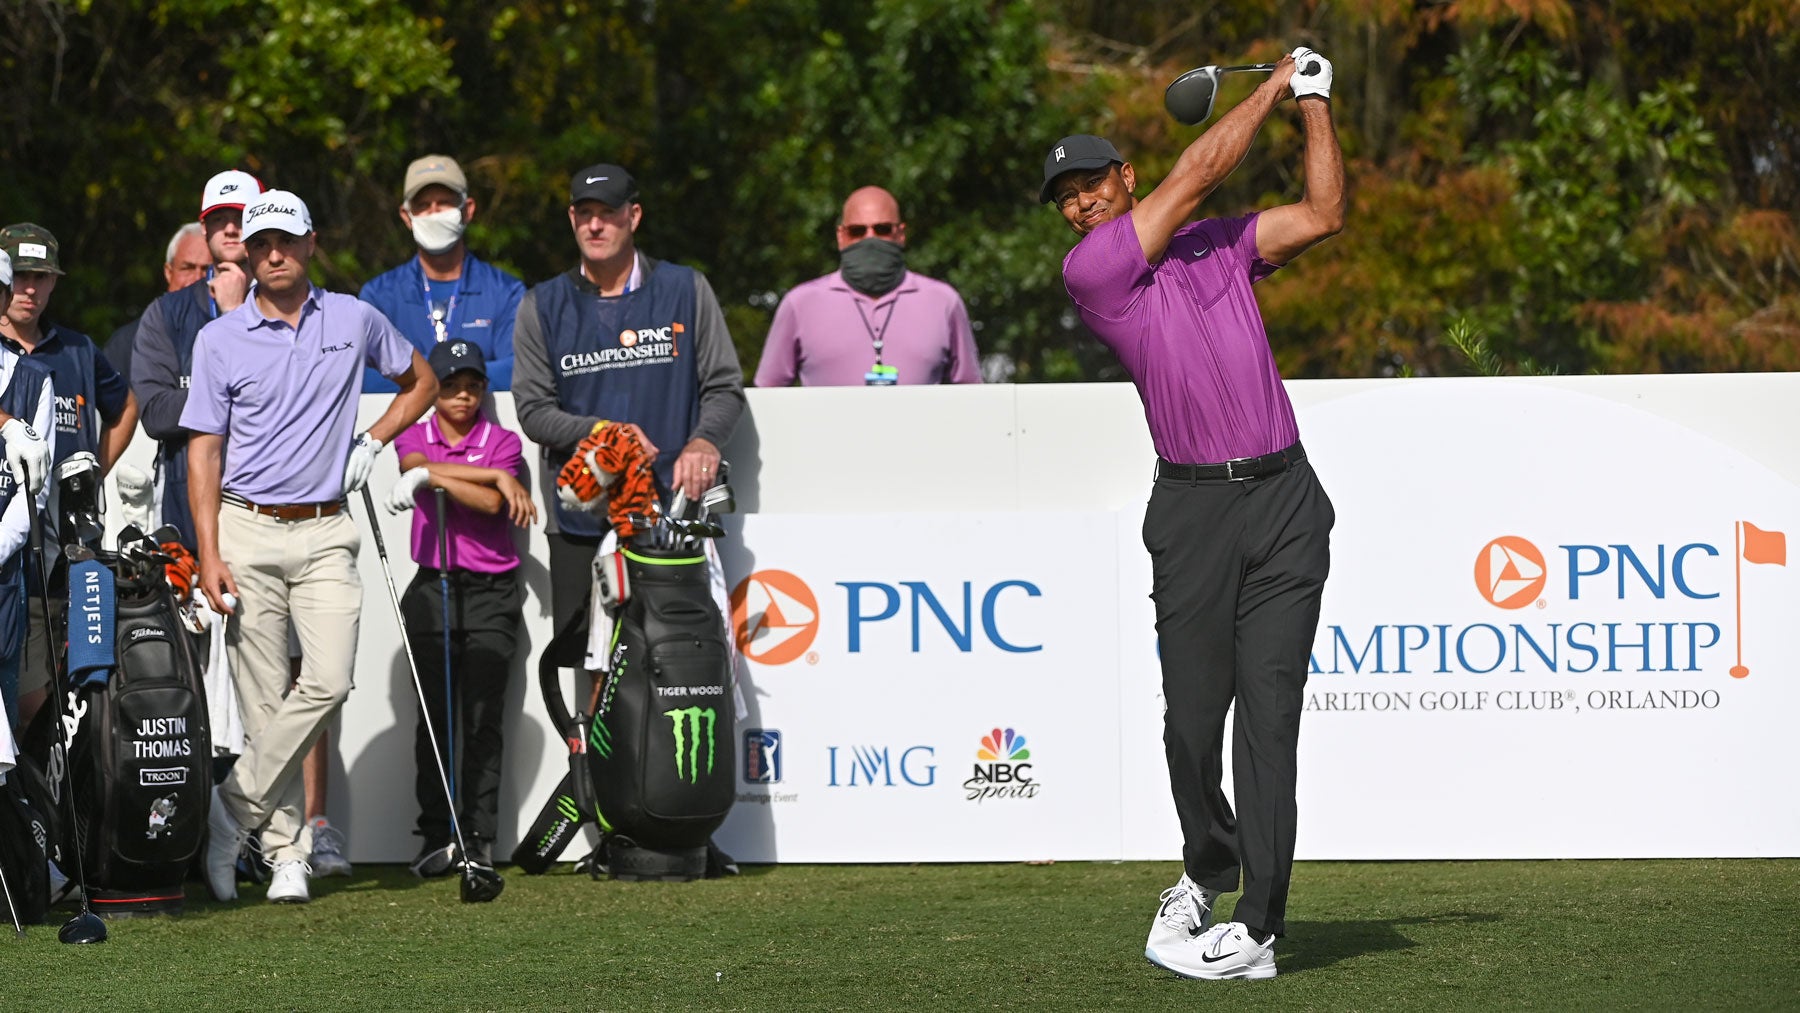 Tiger Woods has made the PNC a must-watch event